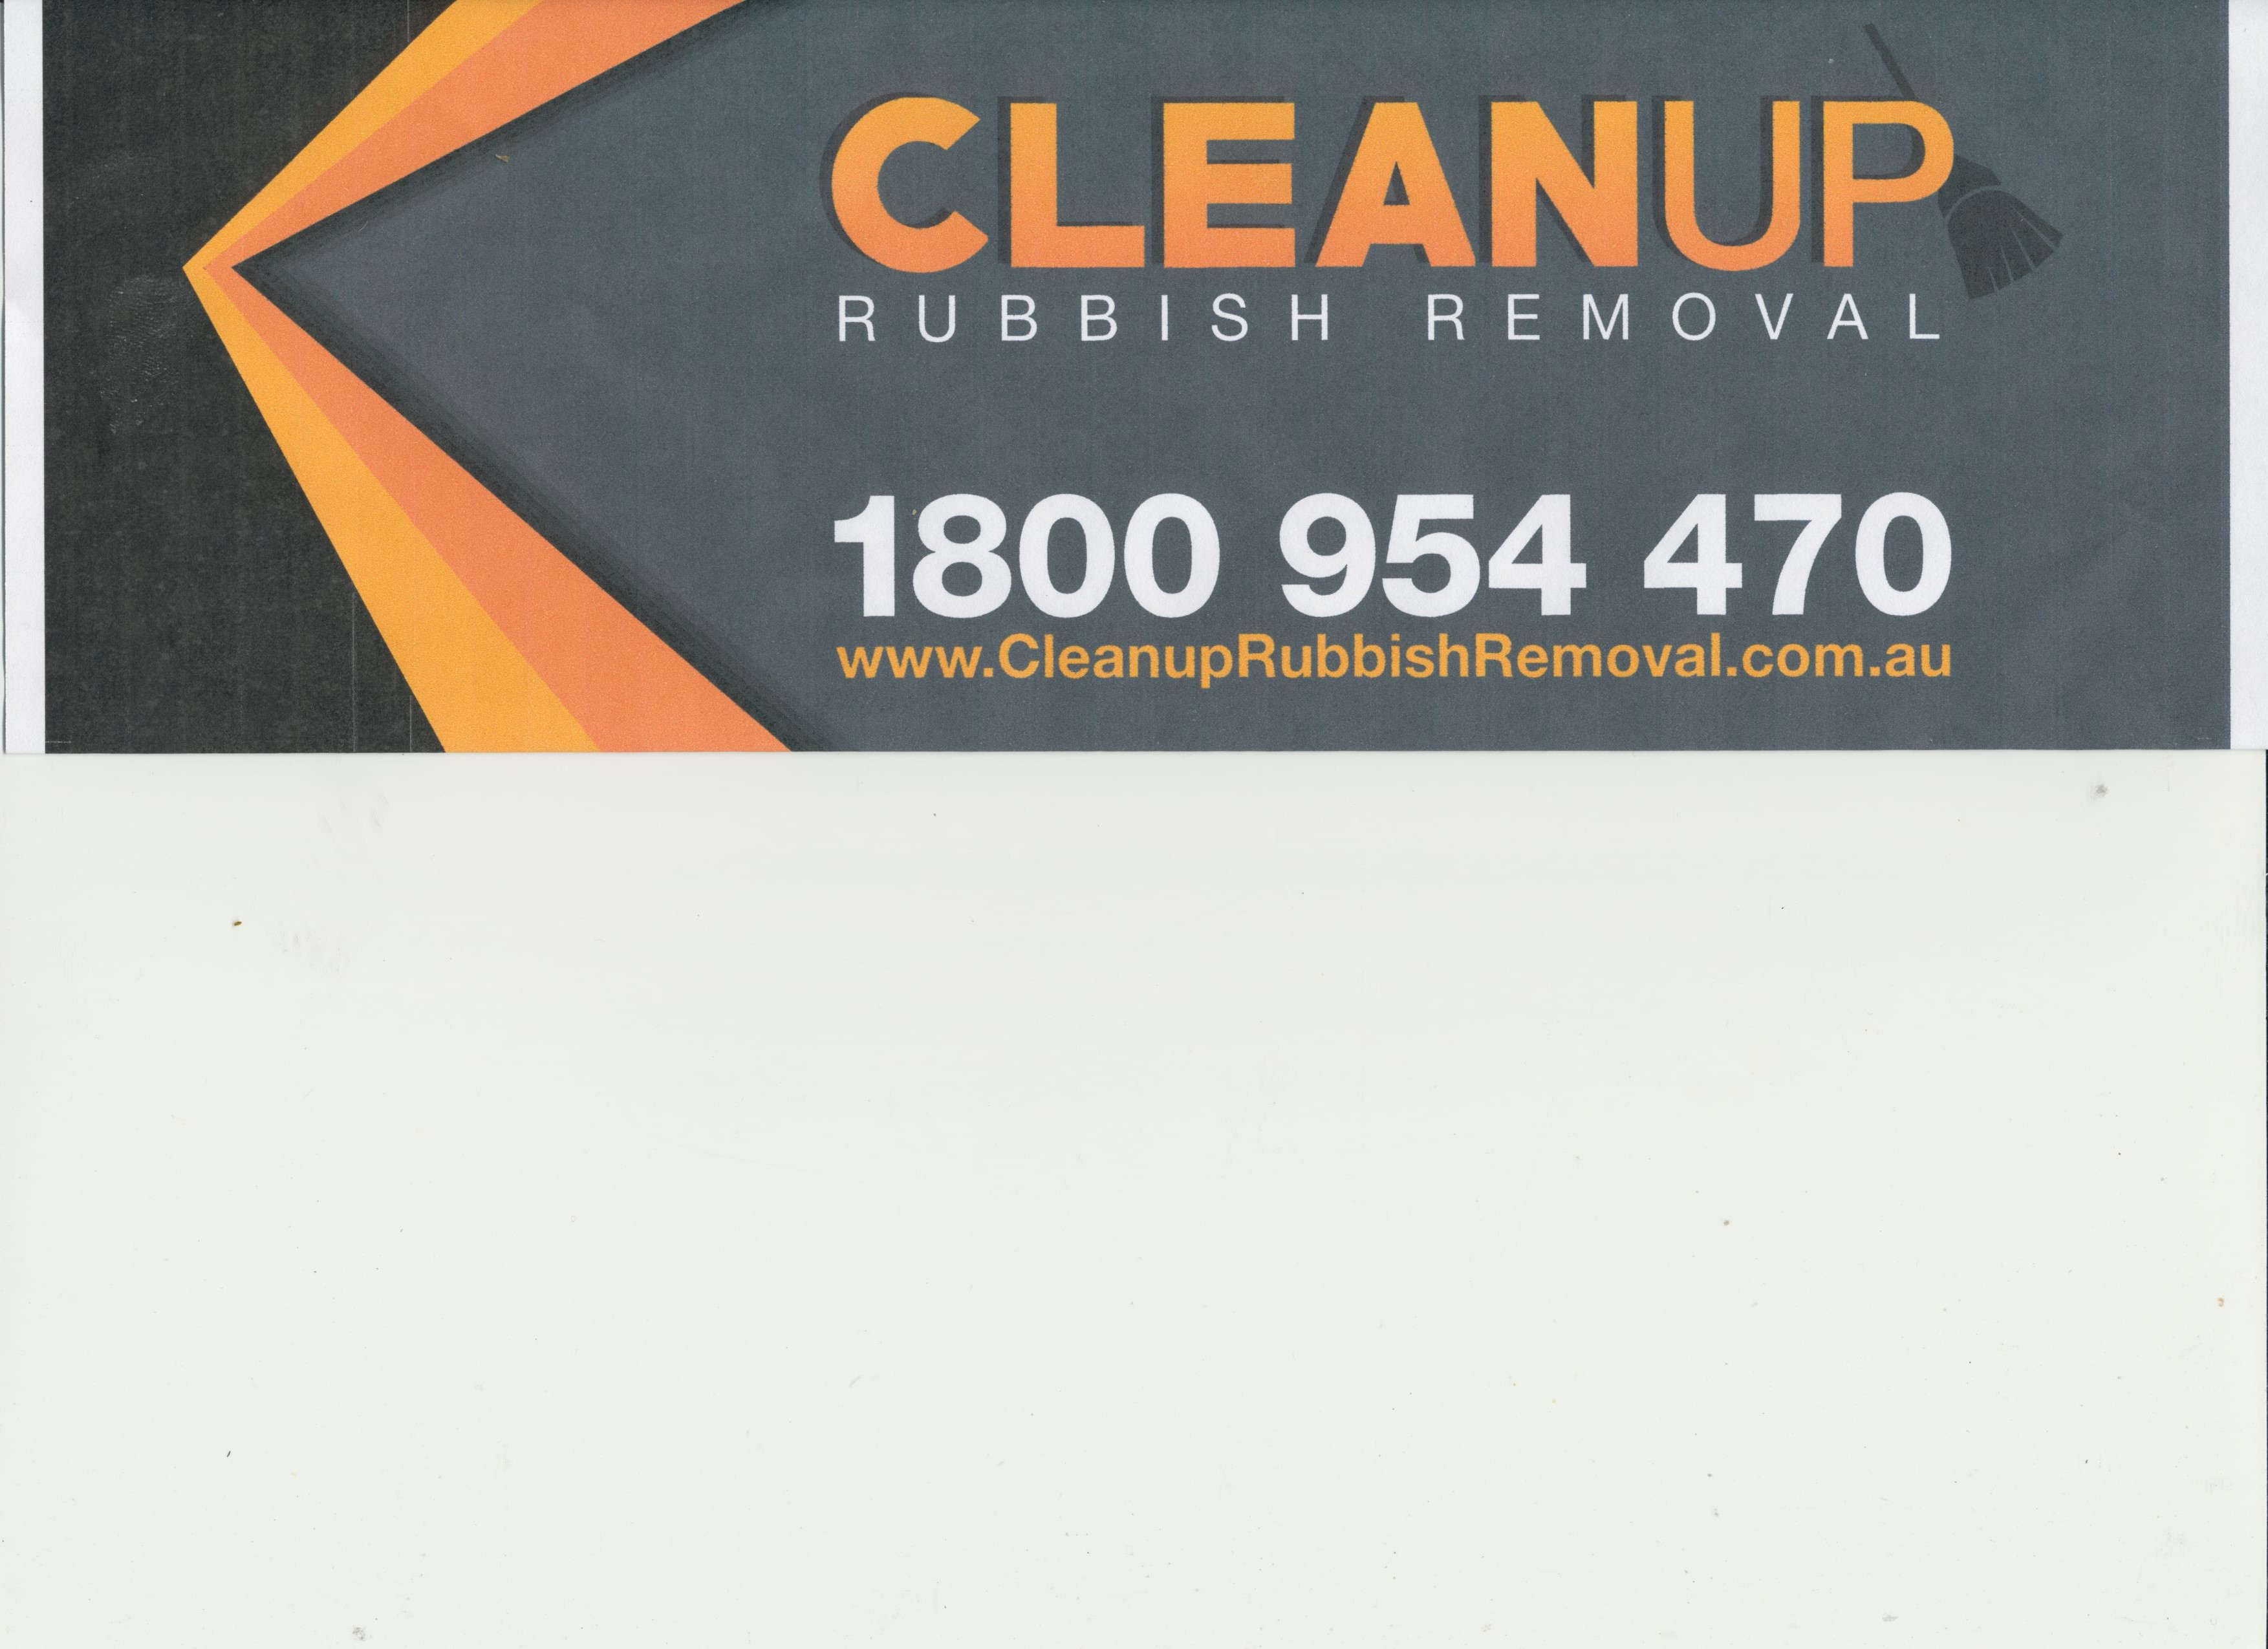 Clean Up Rubbish Removal Logo